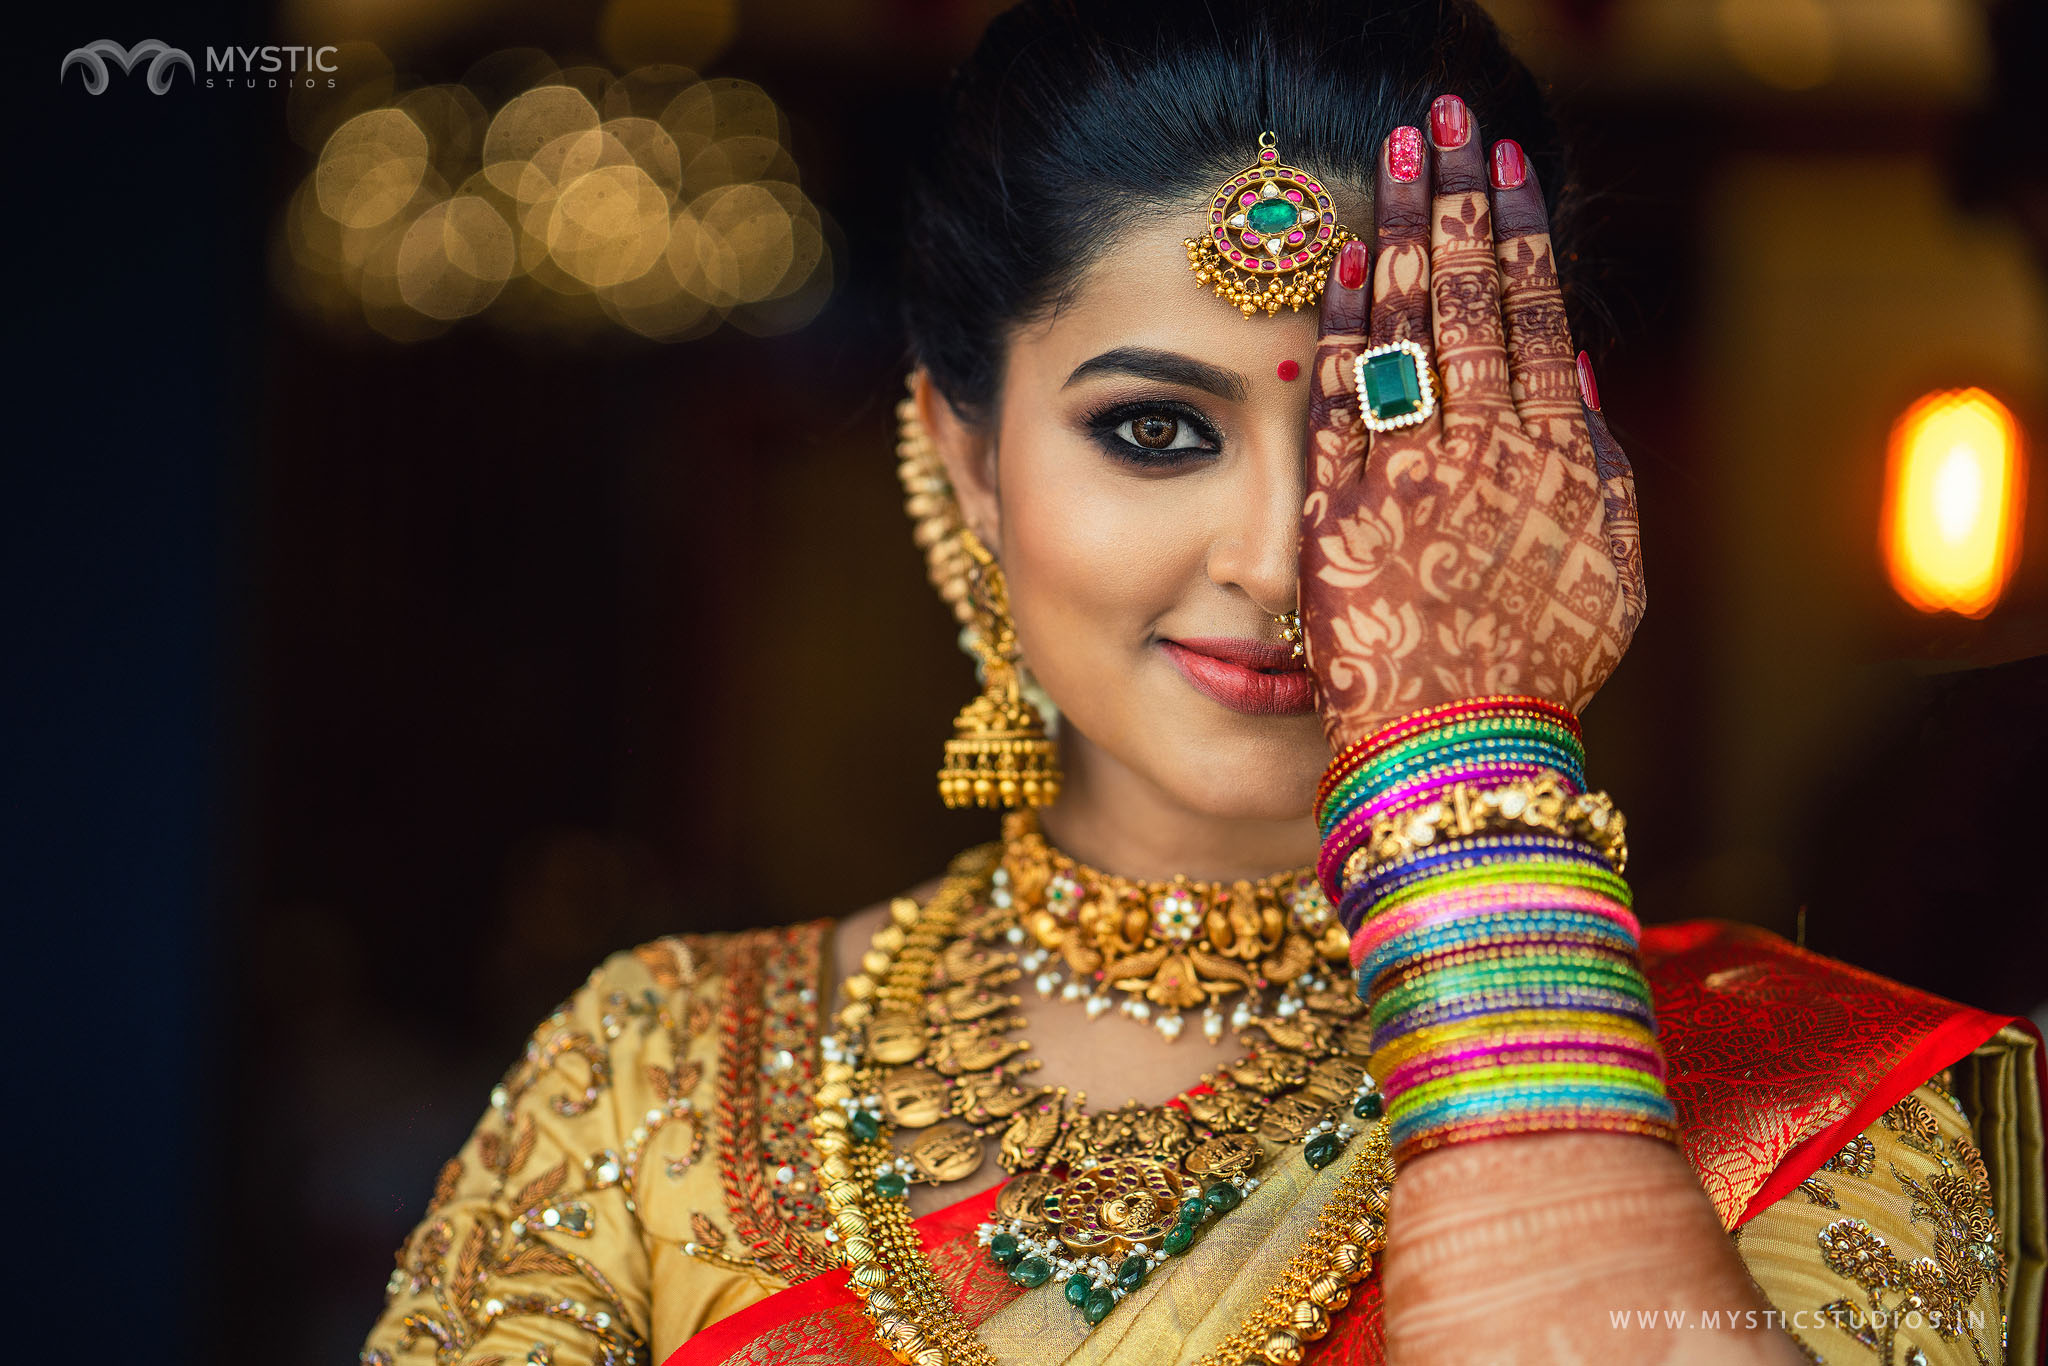 Bridal jewelry trends for Indian weddings in the USA – Sneha